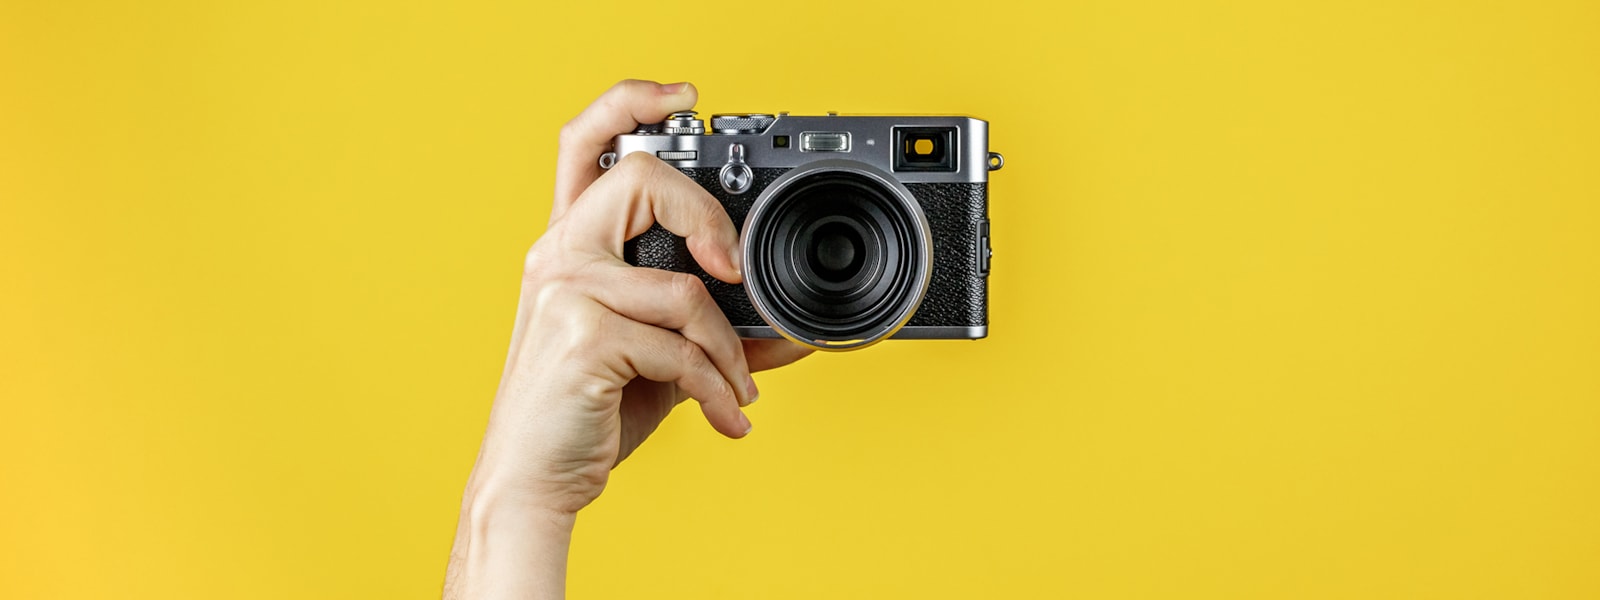 hand holding a camera in front of a yellow background